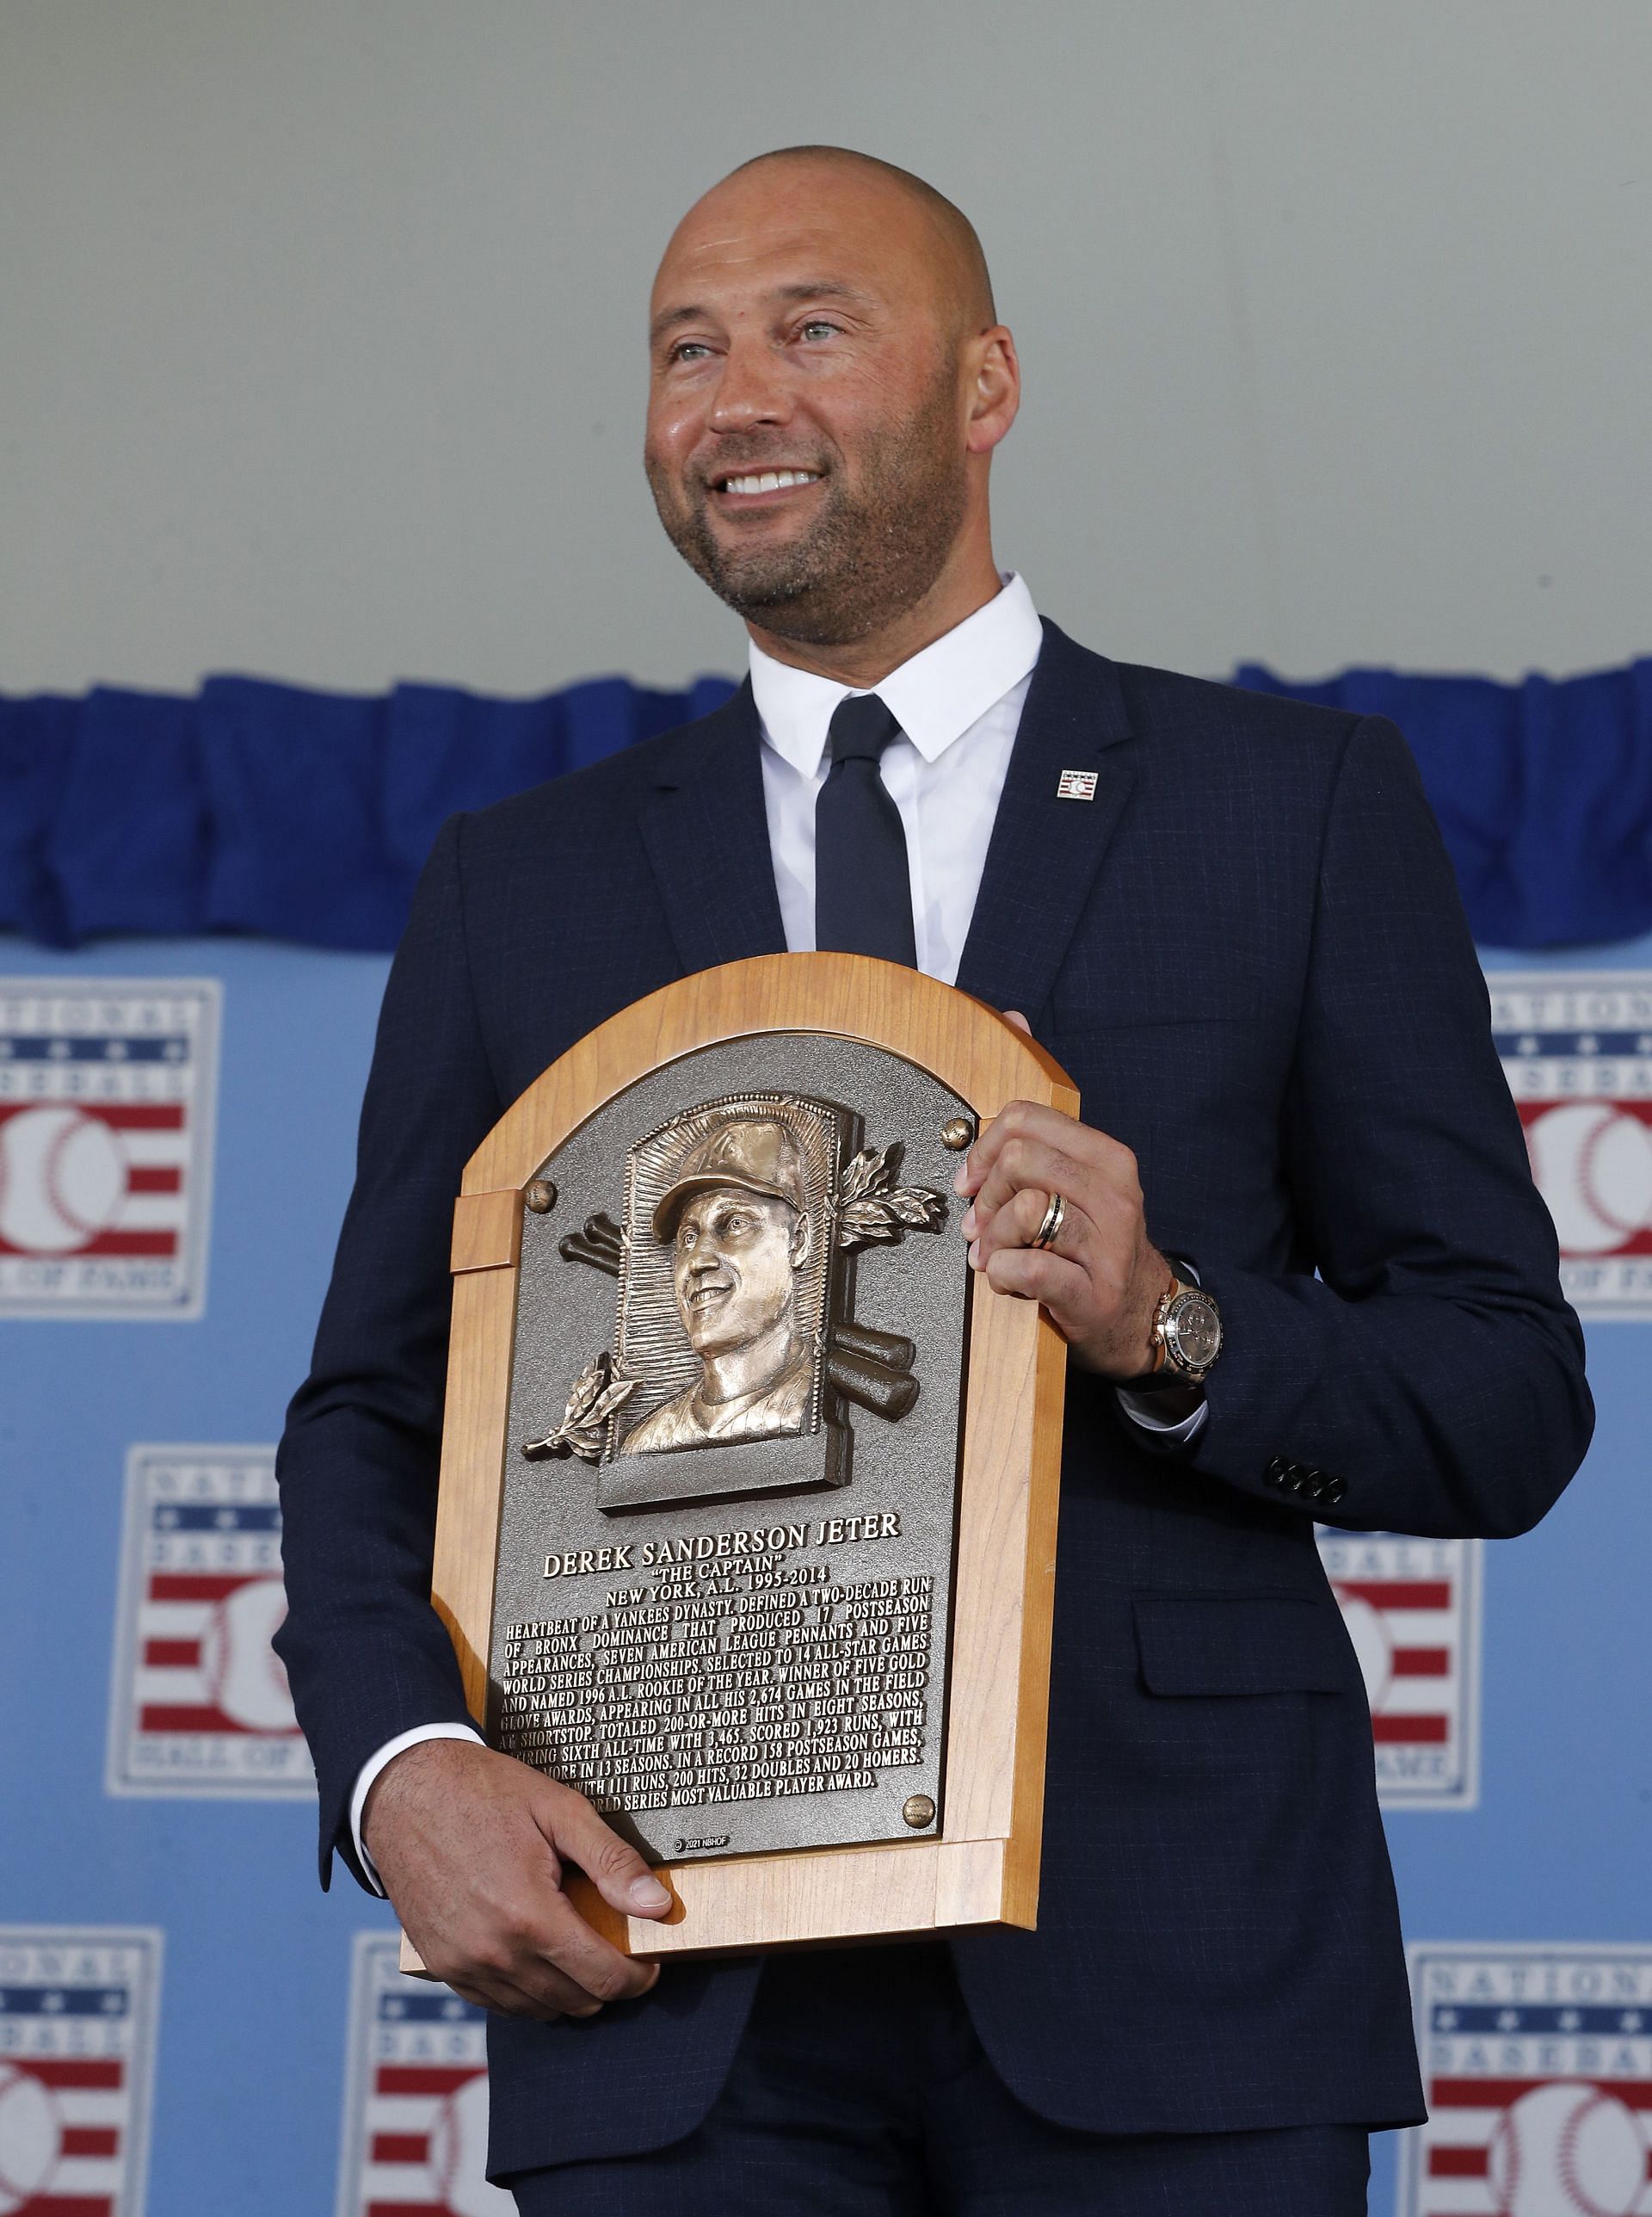 Yankees legend Derek Jeter being inducted to the Baseball Hall of Fame in 2020